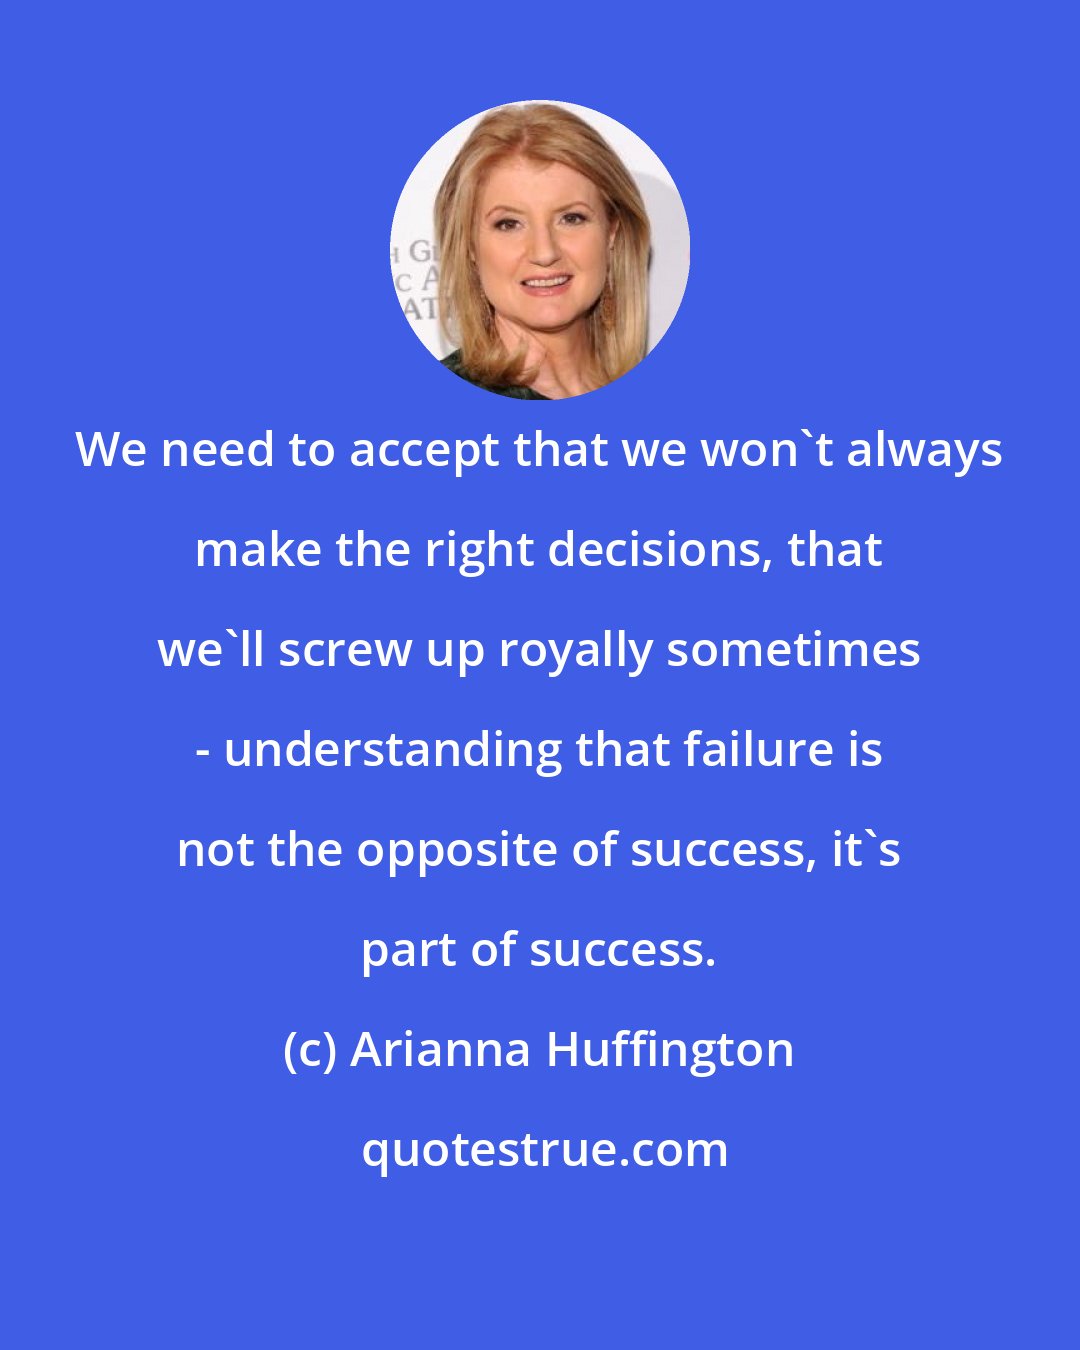 Arianna Huffington: We need to accept that we won't always make the right decisions, that we'll screw up royally sometimes - understanding that failure is not the opposite of success, it's part of success.